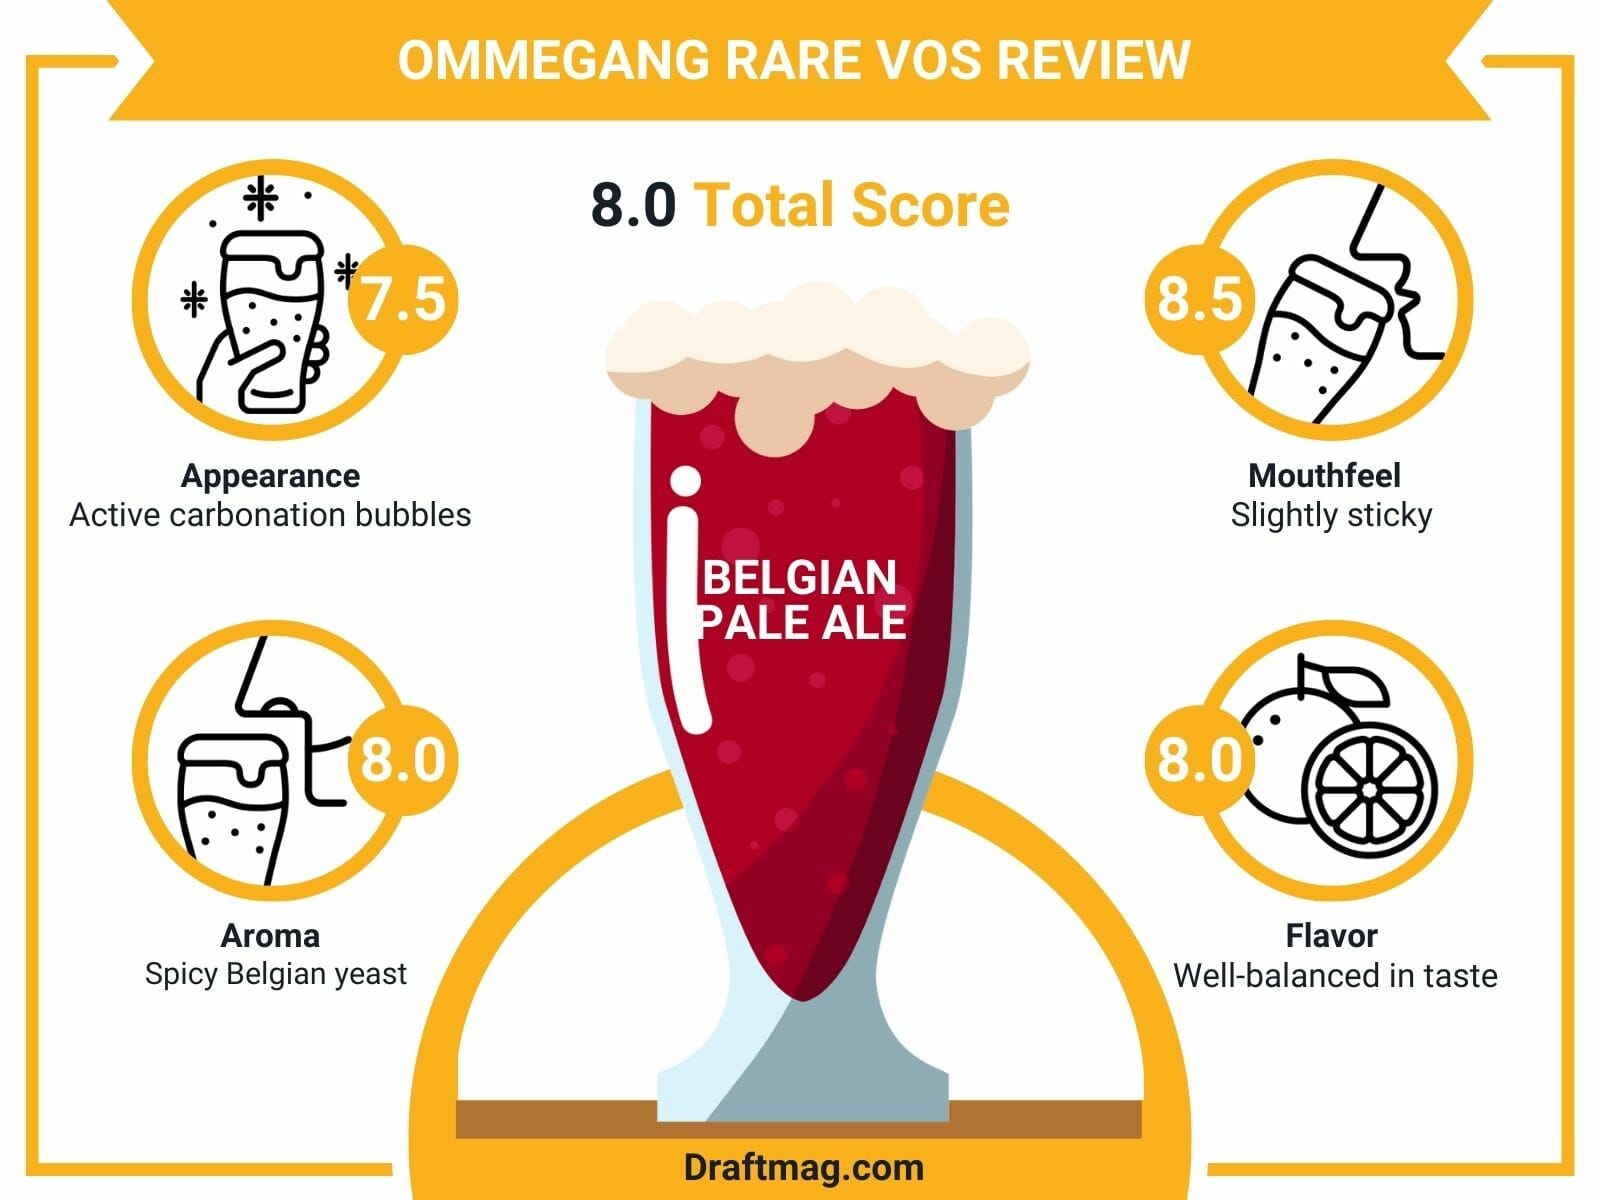 Ommegang Rare Vos Review Infographic